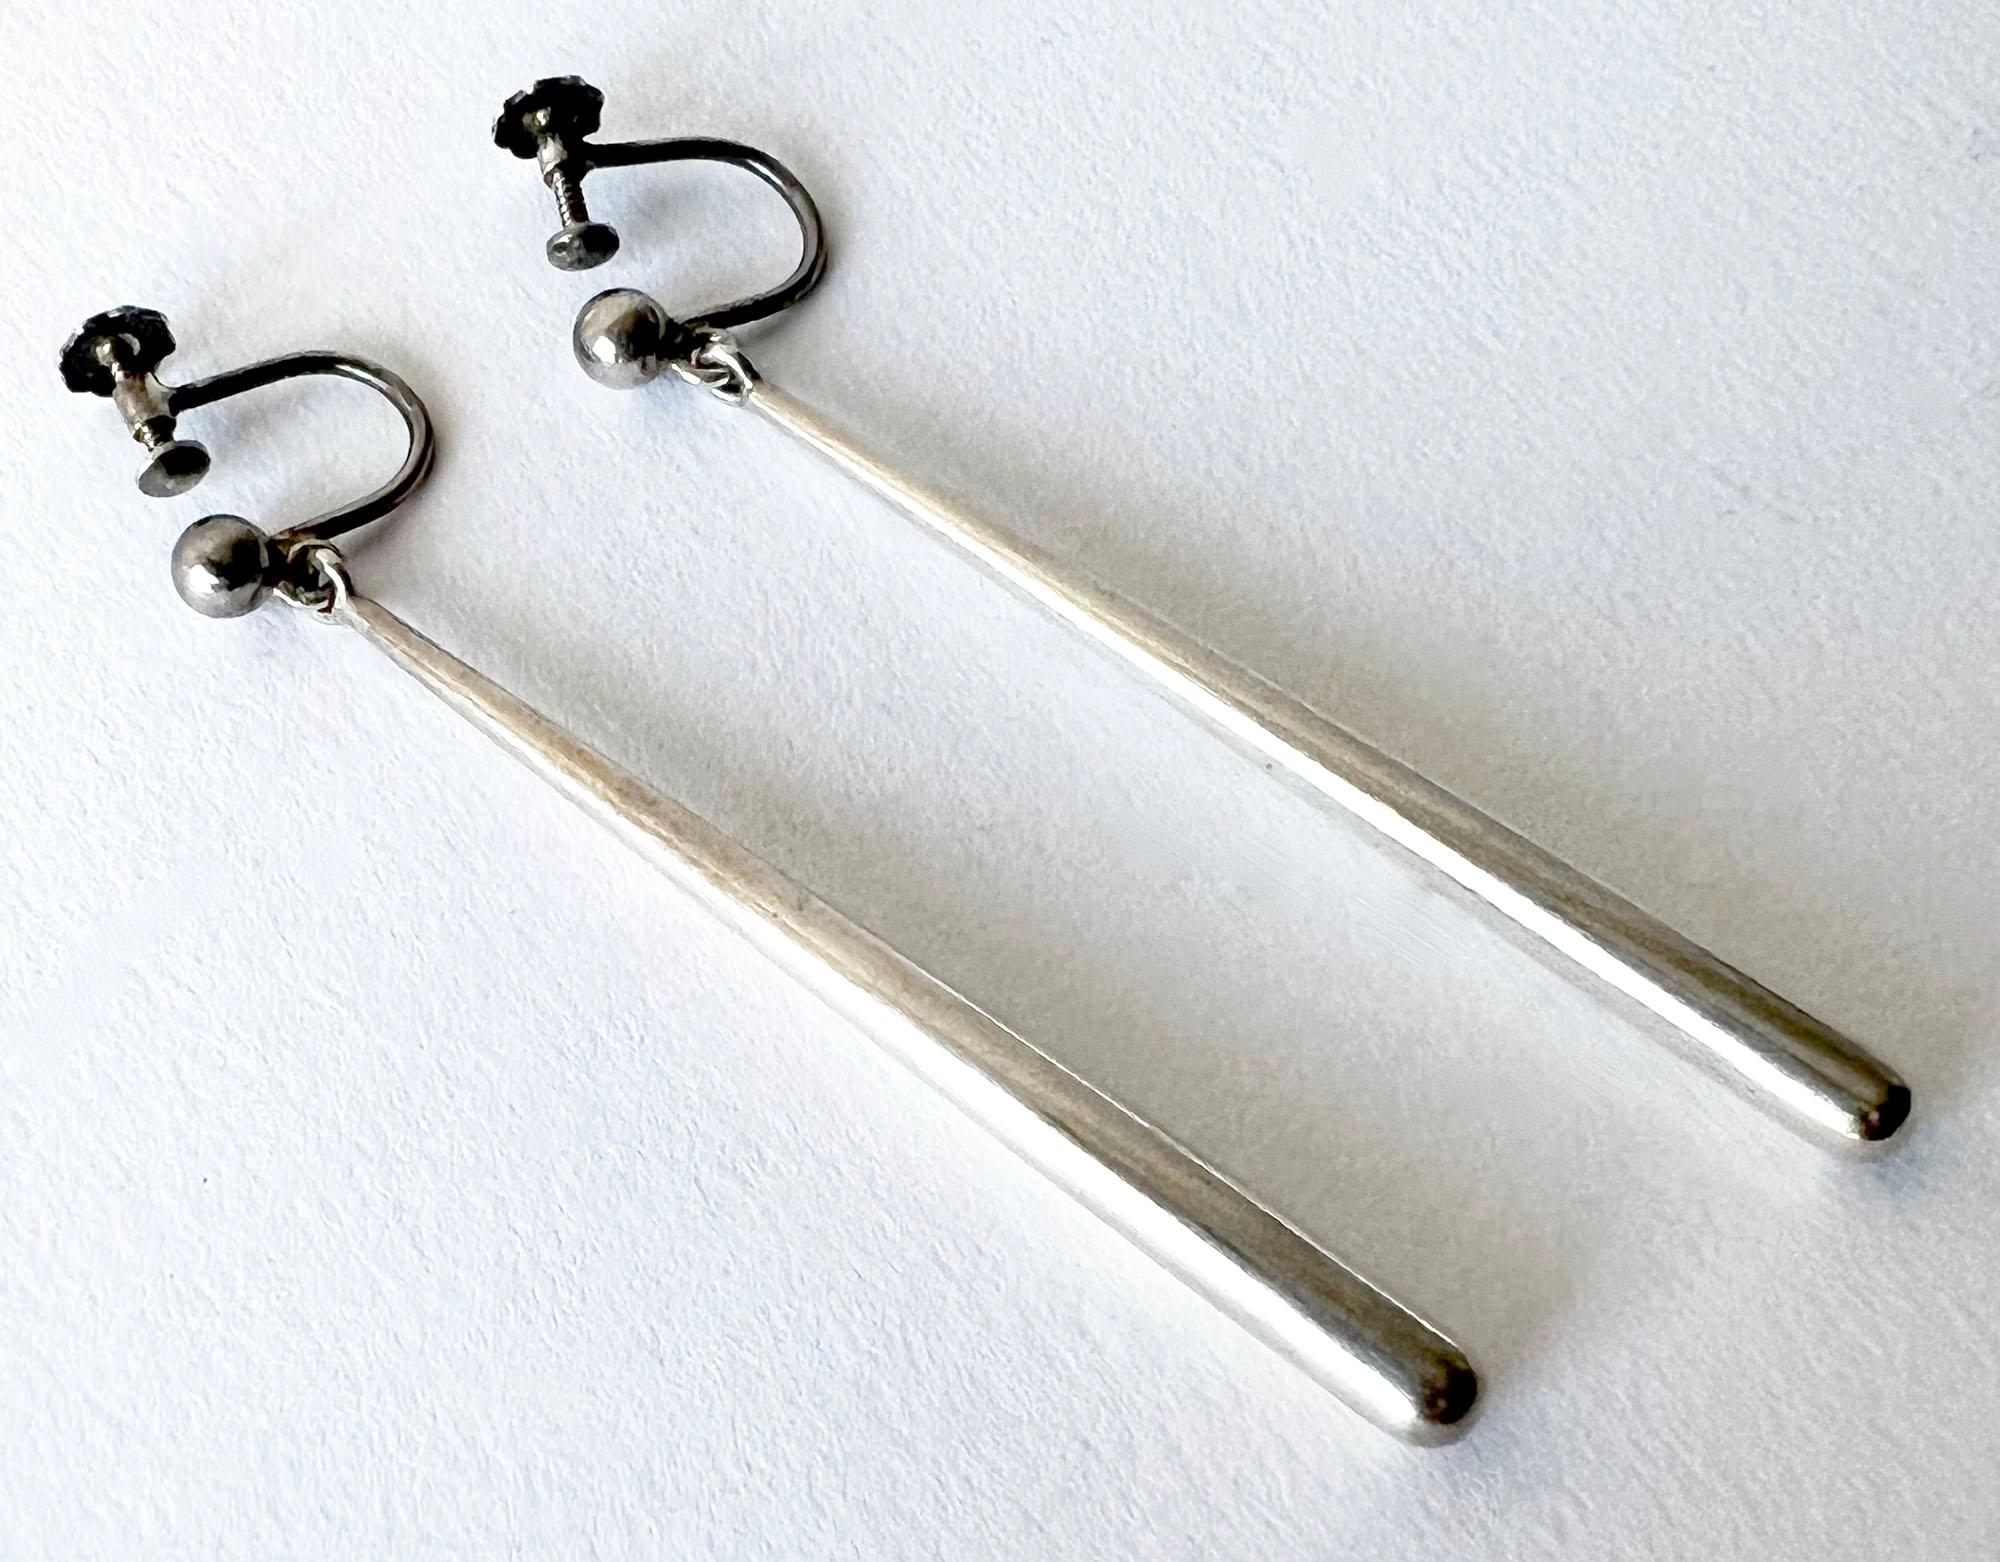 Sterling silver dangle earrings created by Bent Knudsen of Denmark circa 1960s.  Earrings have well distributed weight and are of the screwback variety. They measure 2.25